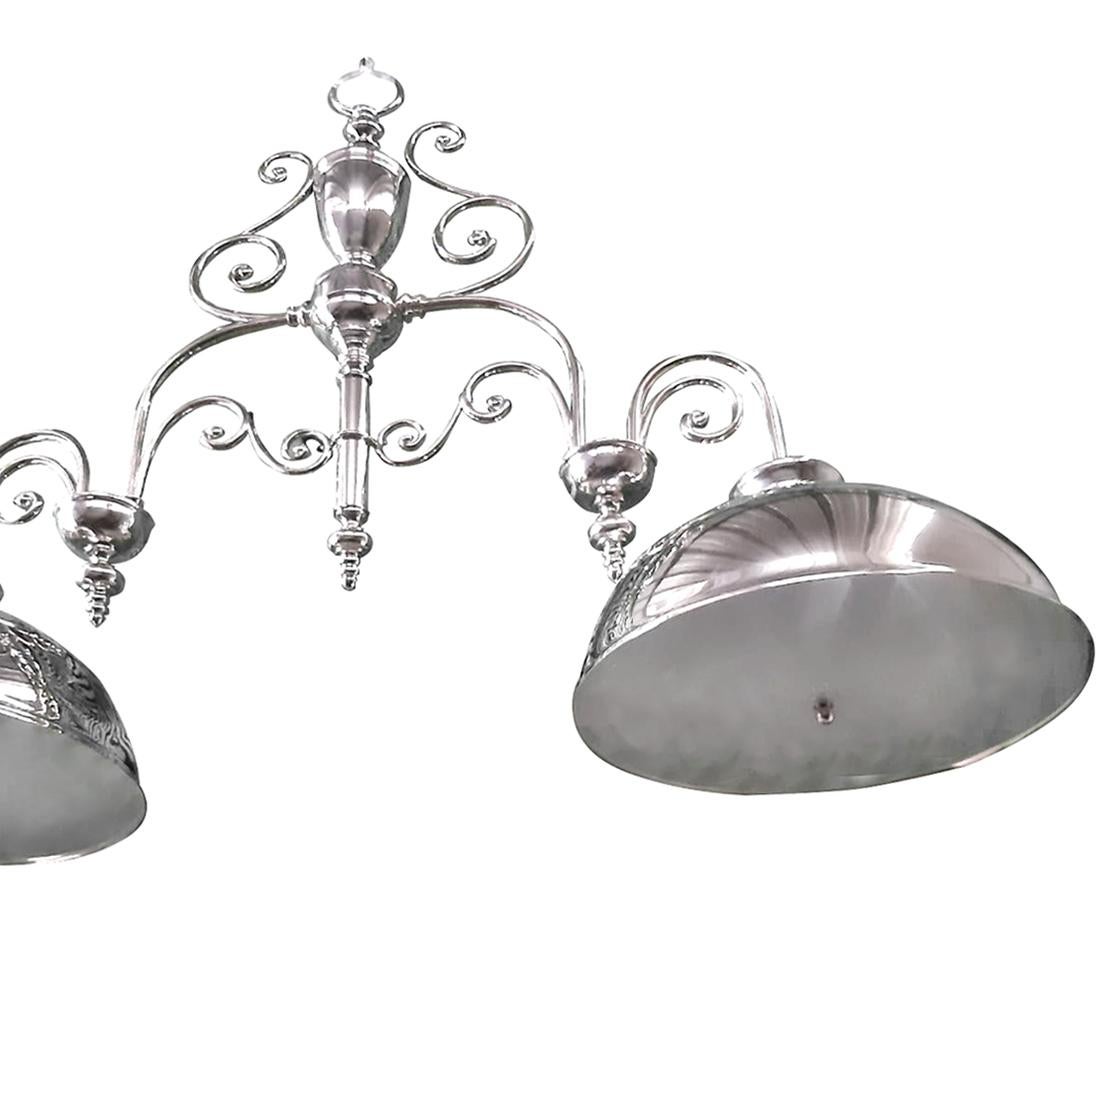 A circa 1950's English silver-plated light fixture with two downward shades; four interior lights in each shade.

Measurements:
Length: 56